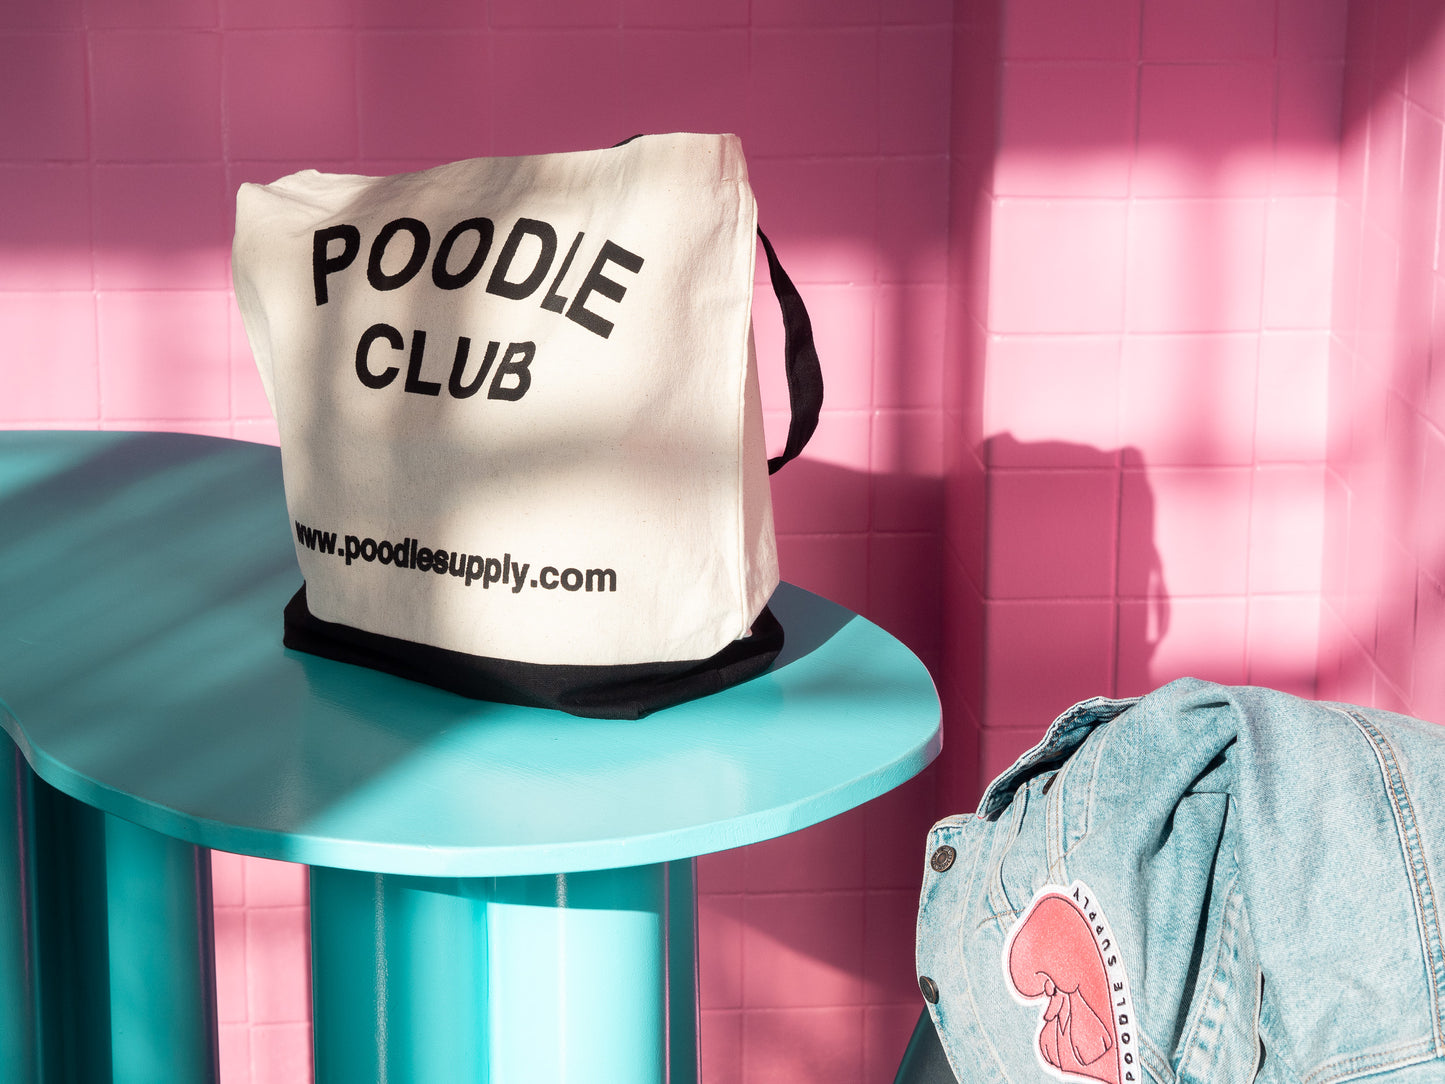 Poodle Supply "POODLE CLUB" Heavy Canvas Tote Bag - Natural White / Black